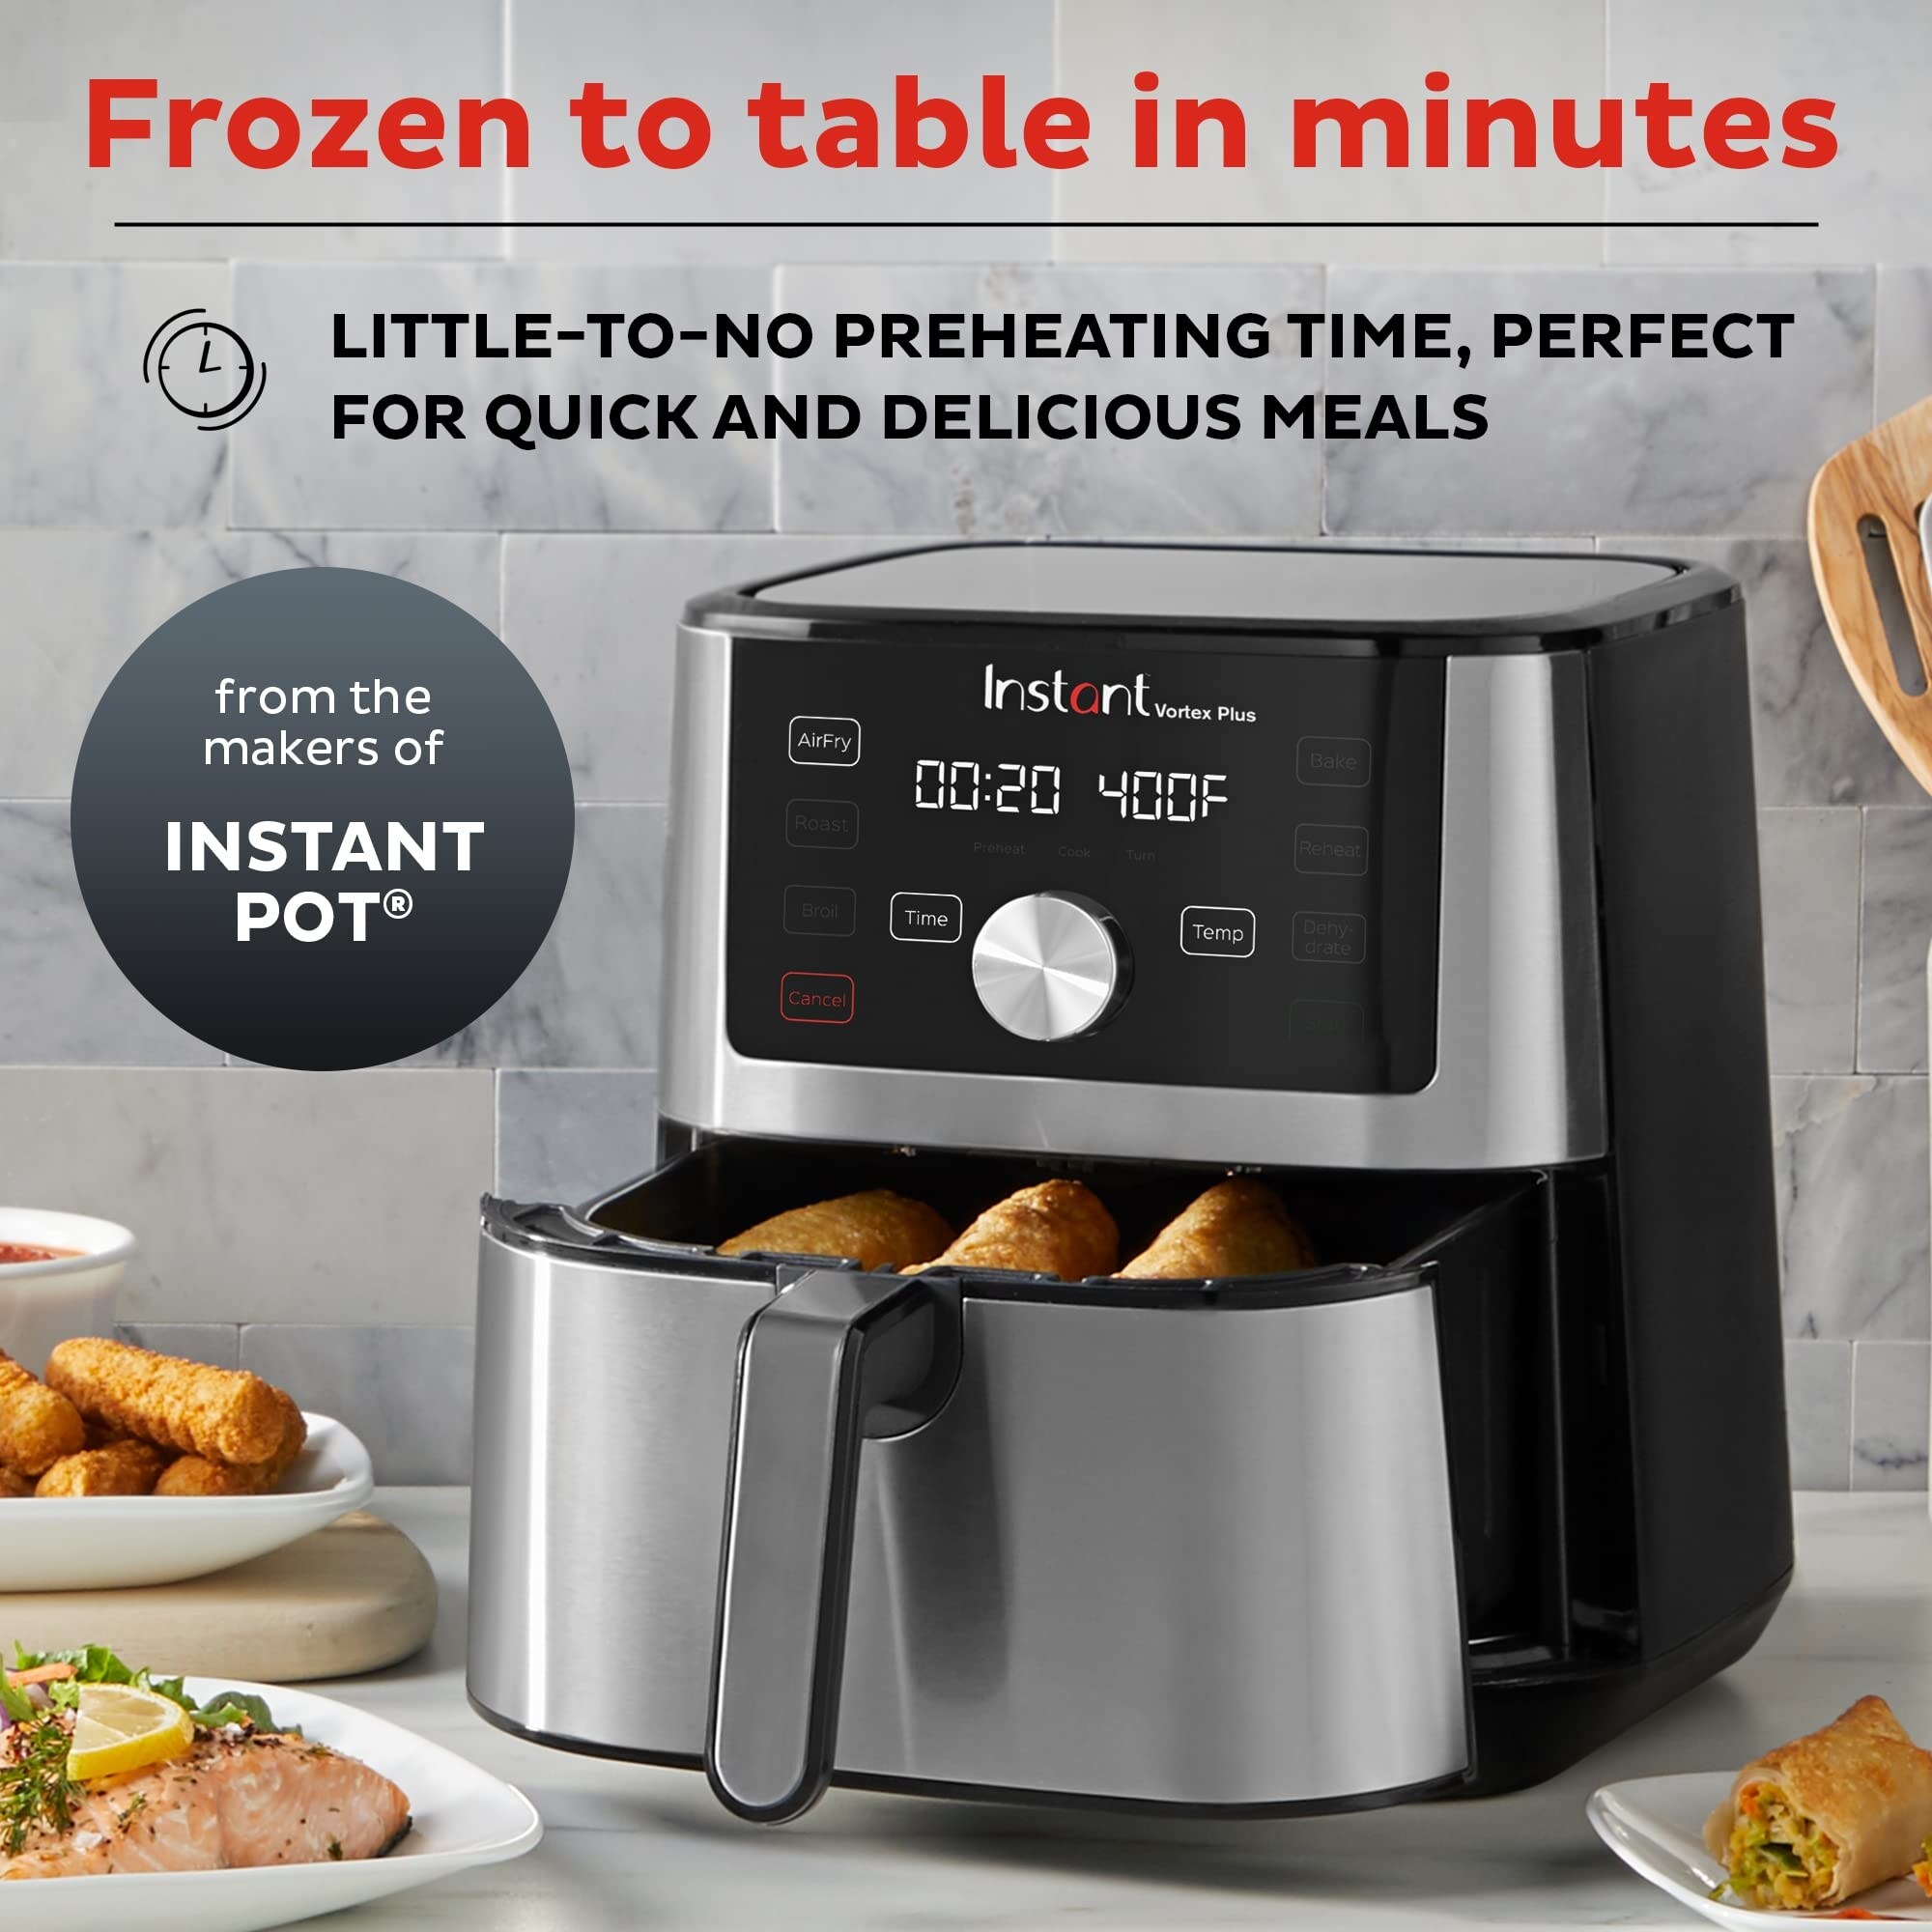 https://ak1.ostkcdn.com/images/products/is/images/direct/3ed97ecfaf0fdfce26e9532ffa310f4f057c1af4/Air-Fryer-Oven%2C-6-Quart%2C-From-the-Makers-of-Pot%2C-6-in-1%2C-Broil%2C-Roast%2C-Dehydrate%2C-Bake%2C-Non-stick-and-Dishwasher-Safe-Basket.jpg